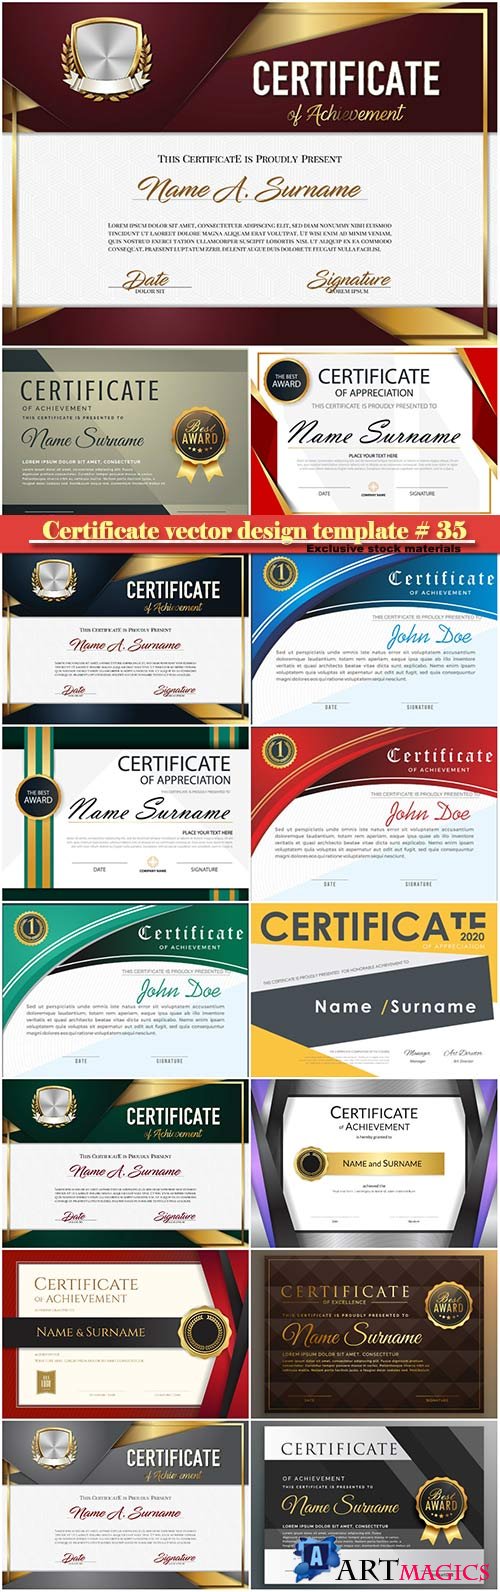 Certificate and vector diploma design template # 35